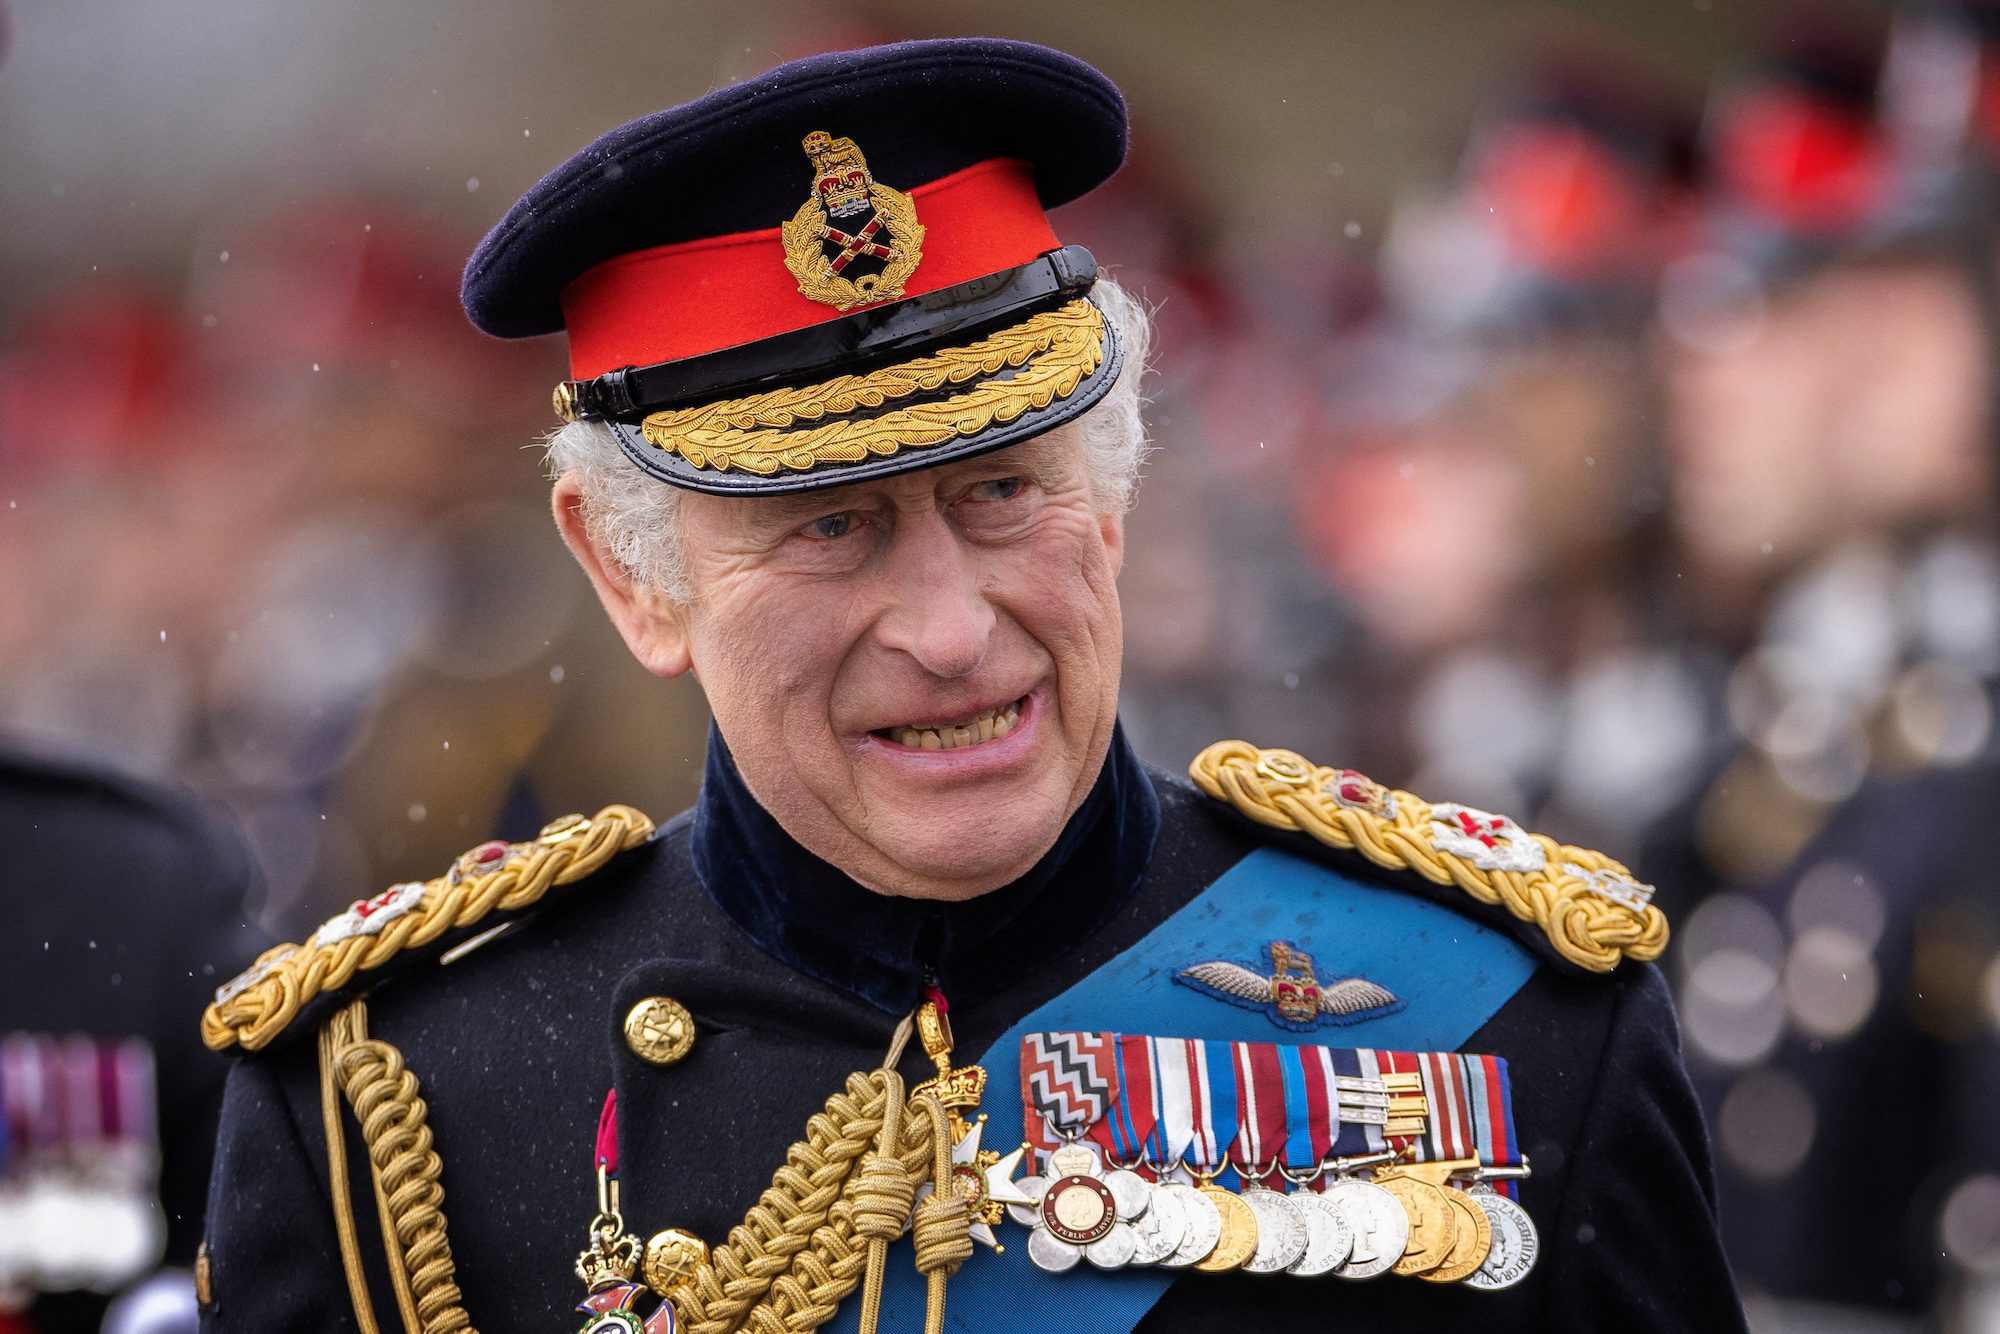  King Charles III inspects the 200th Sovereign's parade at Royal Military Academy Sandhurst on April 14, 2023 in Camberley, England. Dan Kitwood/Pool via REUTERS